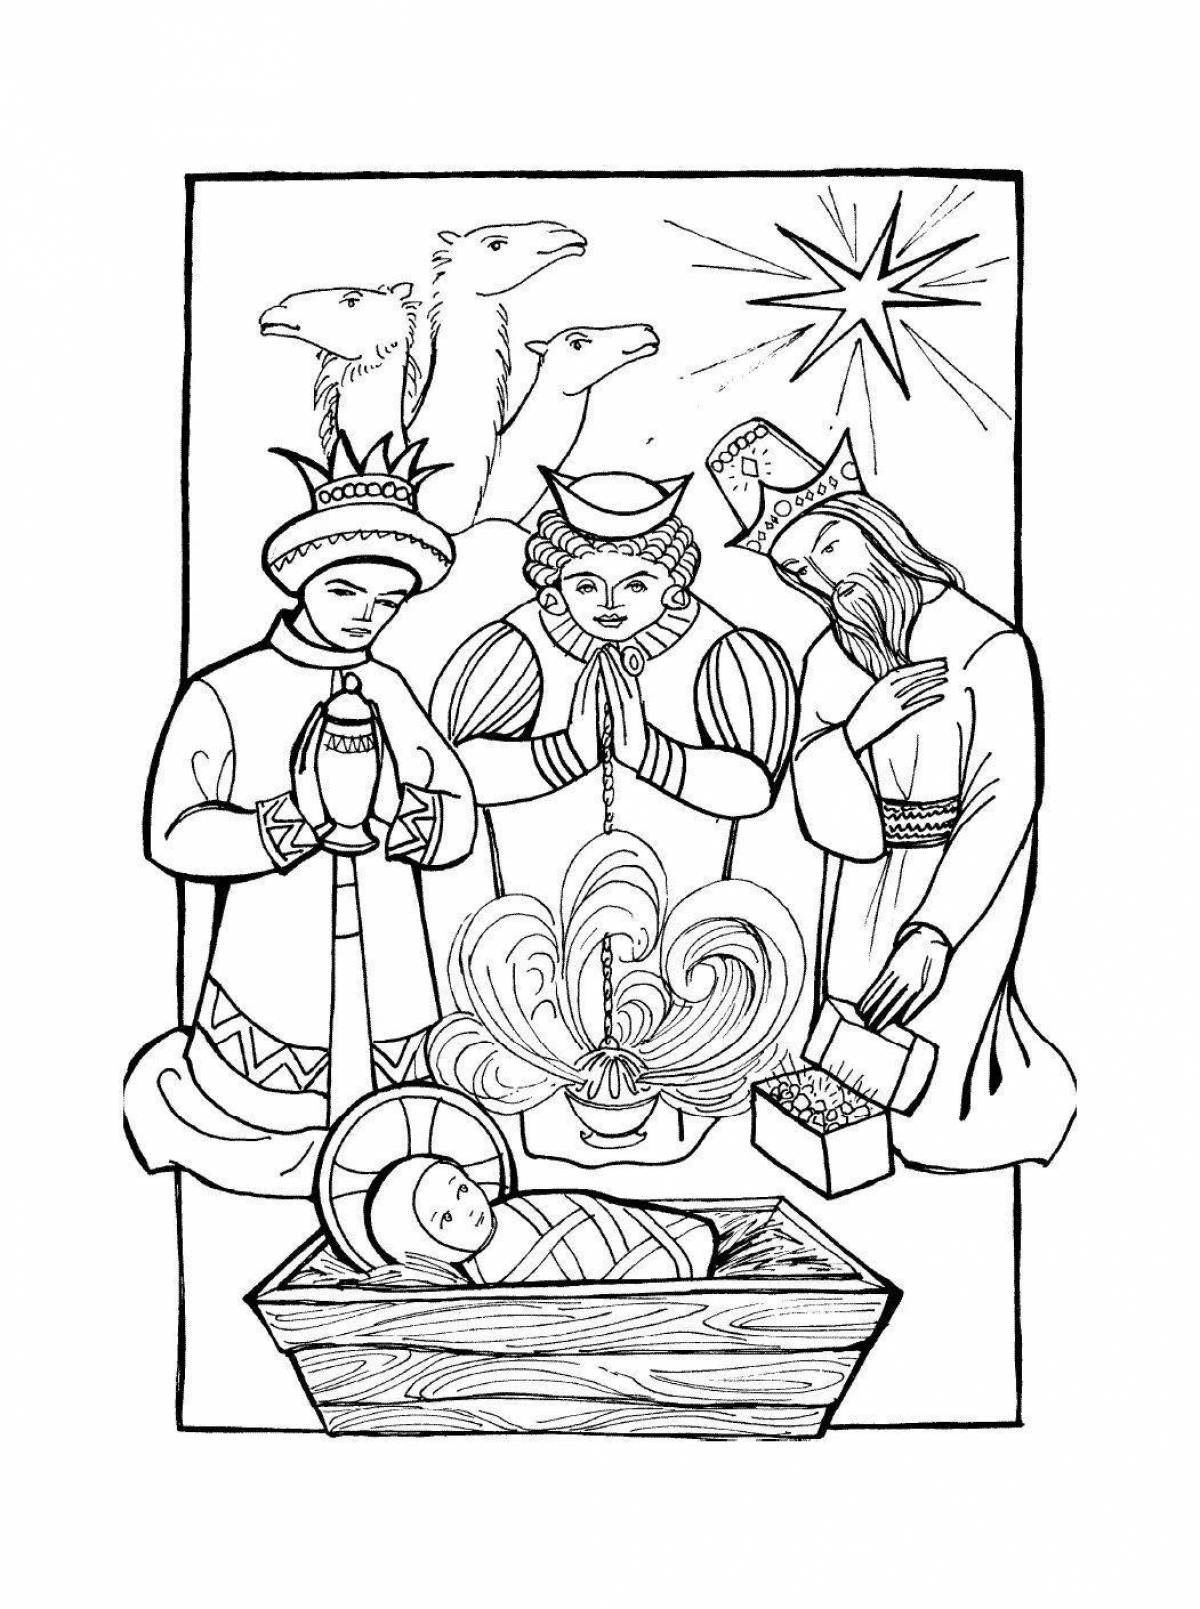 Colorful Christmas story coloring book